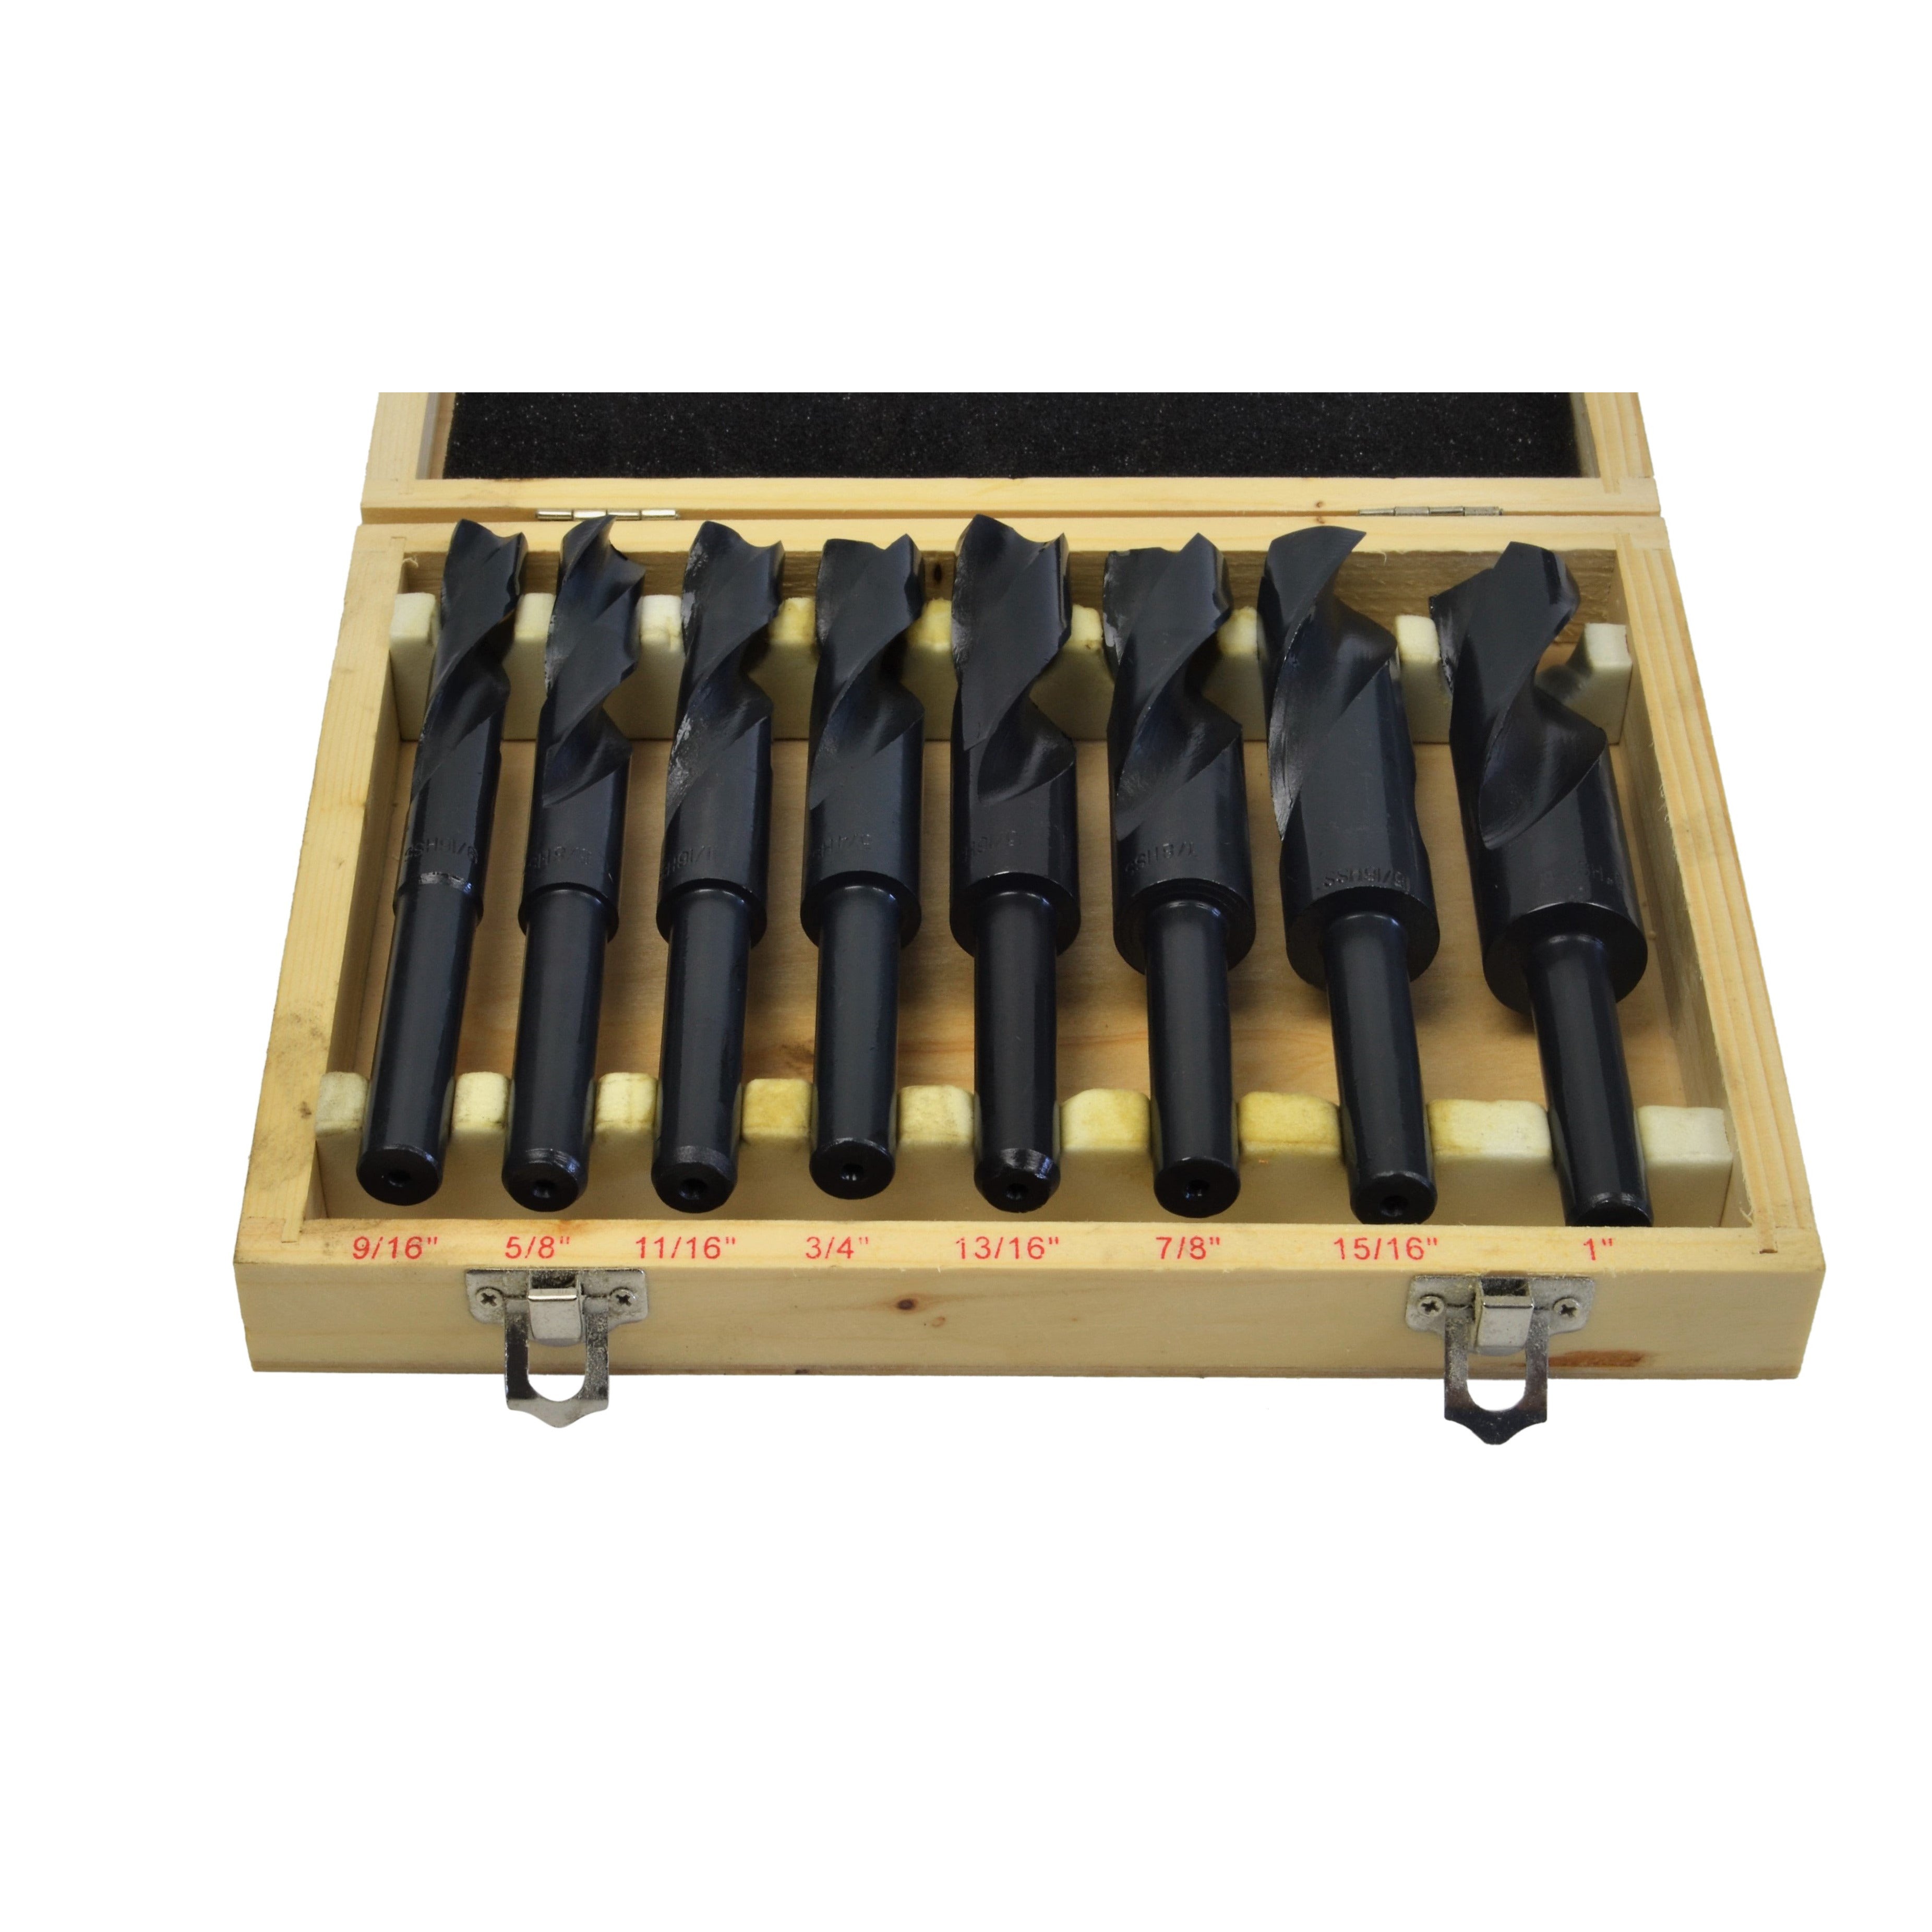 8 PC HSS IMPERIAL 1/2 REDUCED SHANK DRILL SET DRILLS 9/16 up to 1" 